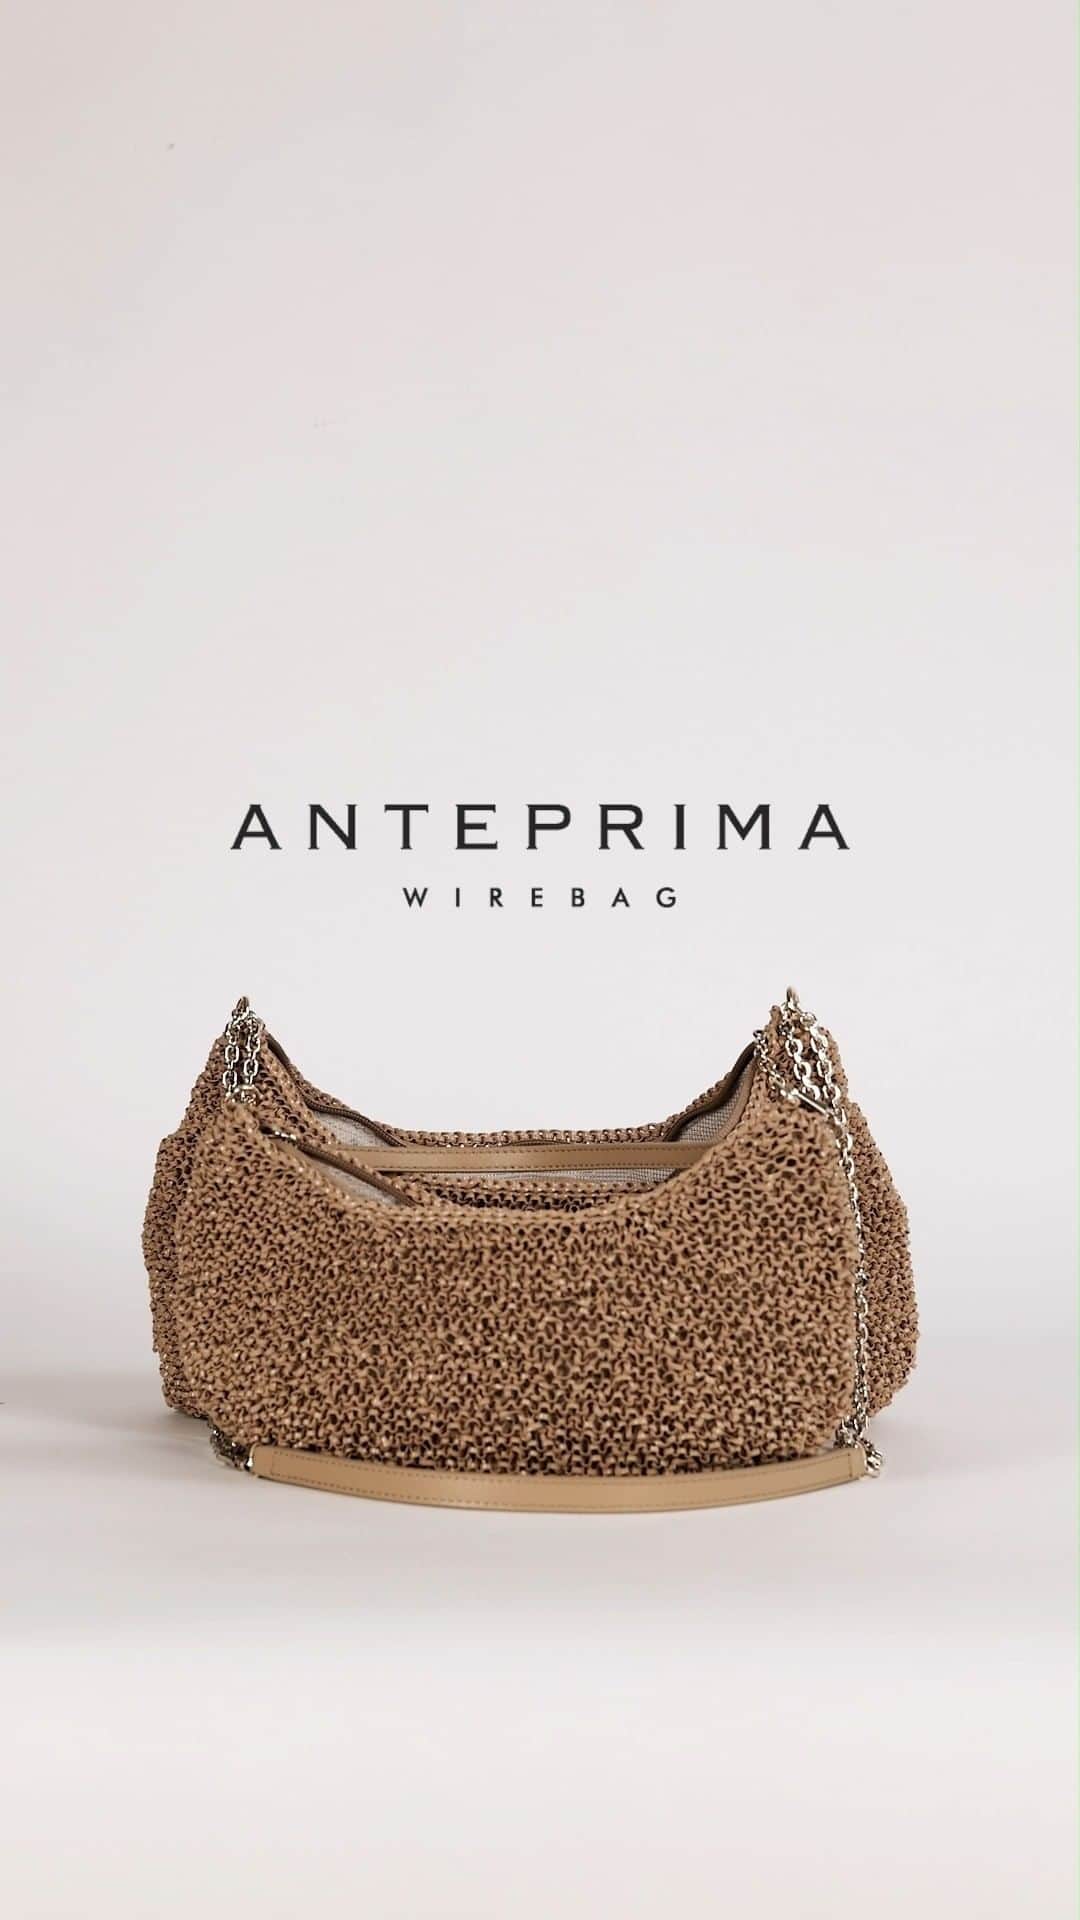 ANTEPRIMAのインスタグラム：「What’s in FORTUNA?  Our FORTUNA can fit more than you can imagine. Not just only keeping your essentials but also holding the greatest fortune for you! Let’s see what is your fortune message of the day!  Shop the FORTUNA Collection now.  #ANTEPRIMA #WIREBAG #FW22 #FallWinter2022 #FortuneCookie #HoboBag #WorkBag #MiniBag #Crochet #CrochetBag #Handcraft #Craftsmenship #Craftbag #Knitting」